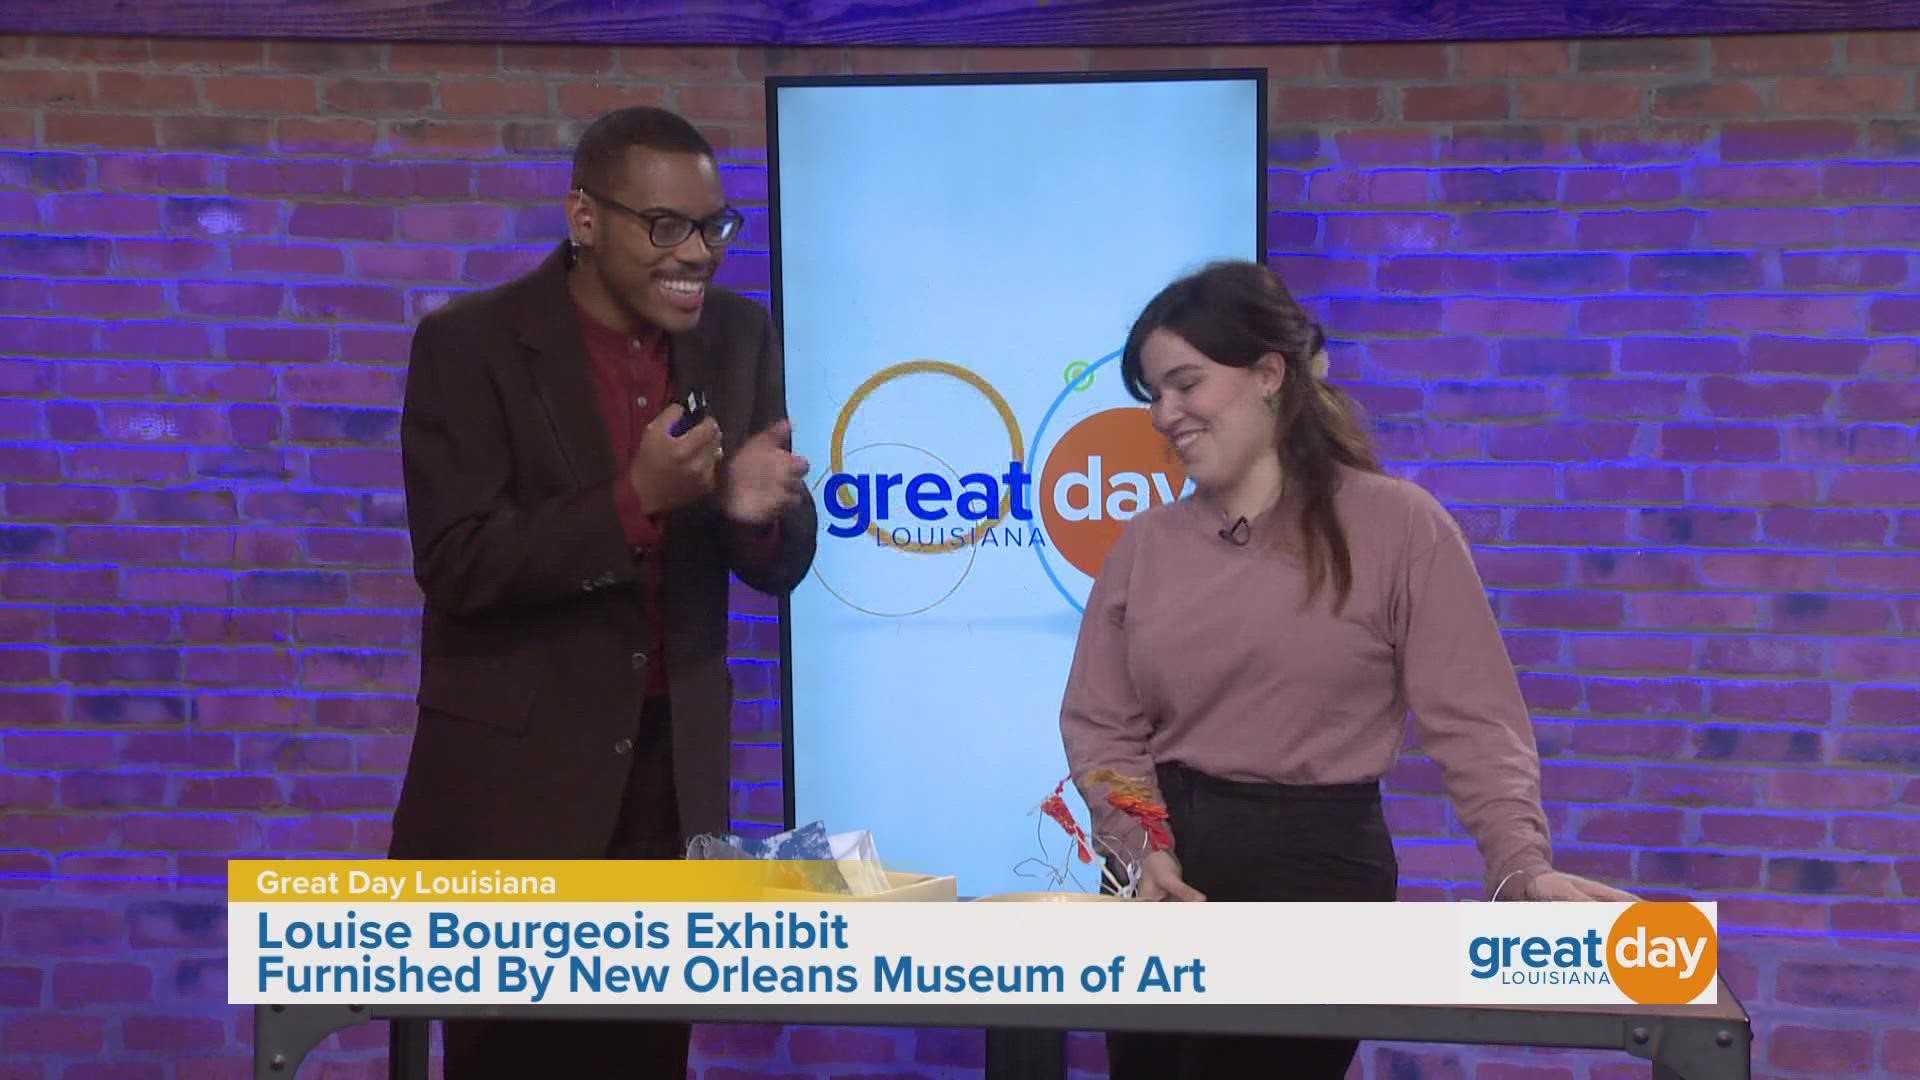 The New Orleans Museum of Art shared a "do-it-yourself" craft that is inspired by a featured exhibit at the museum.